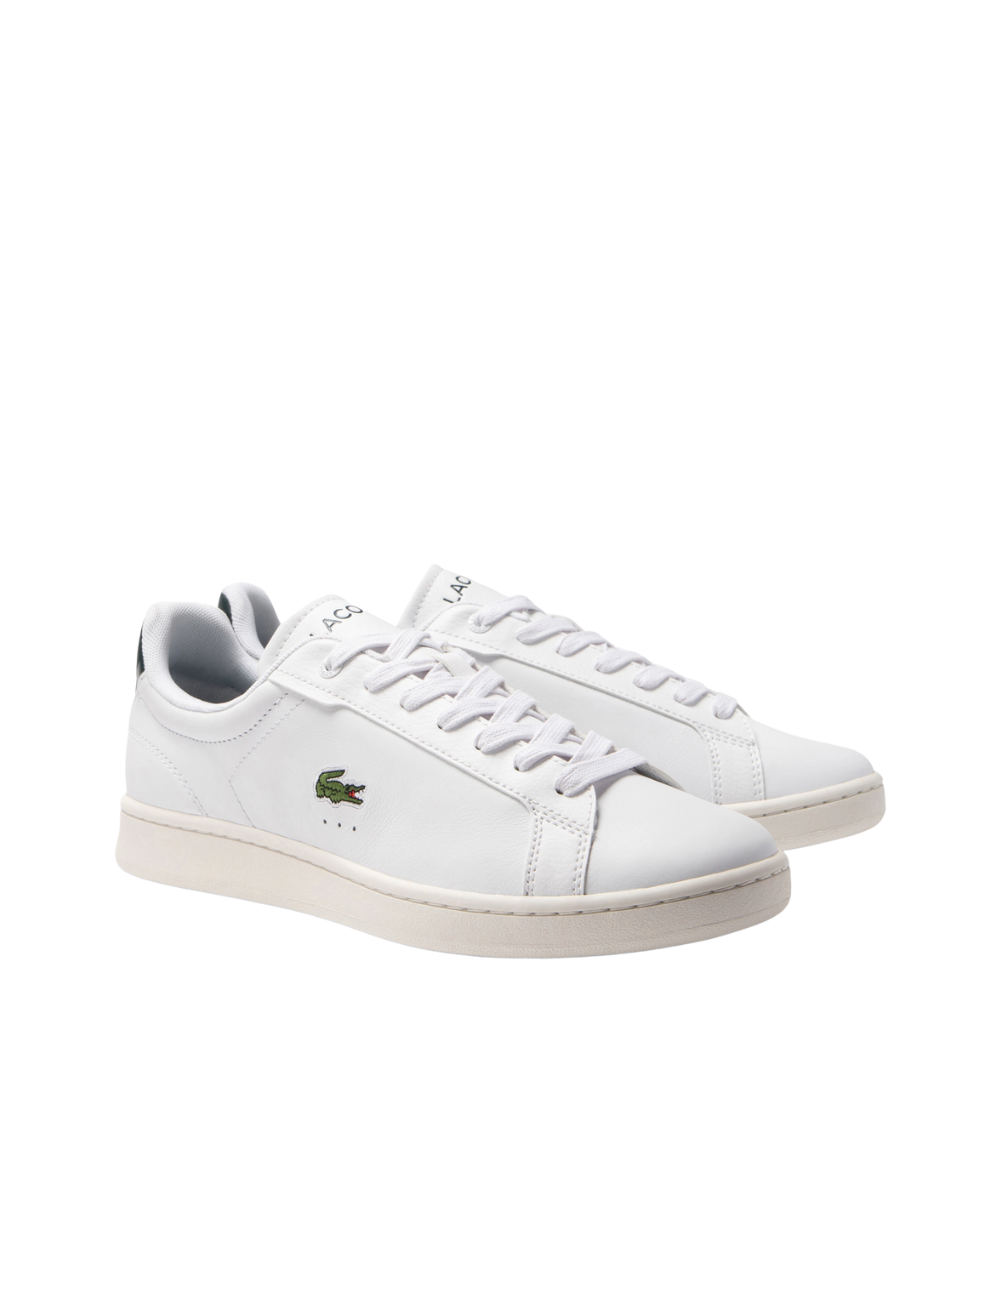 LACOSTE CARNABY PRO LEATHER PREMIUM SNEAKERS